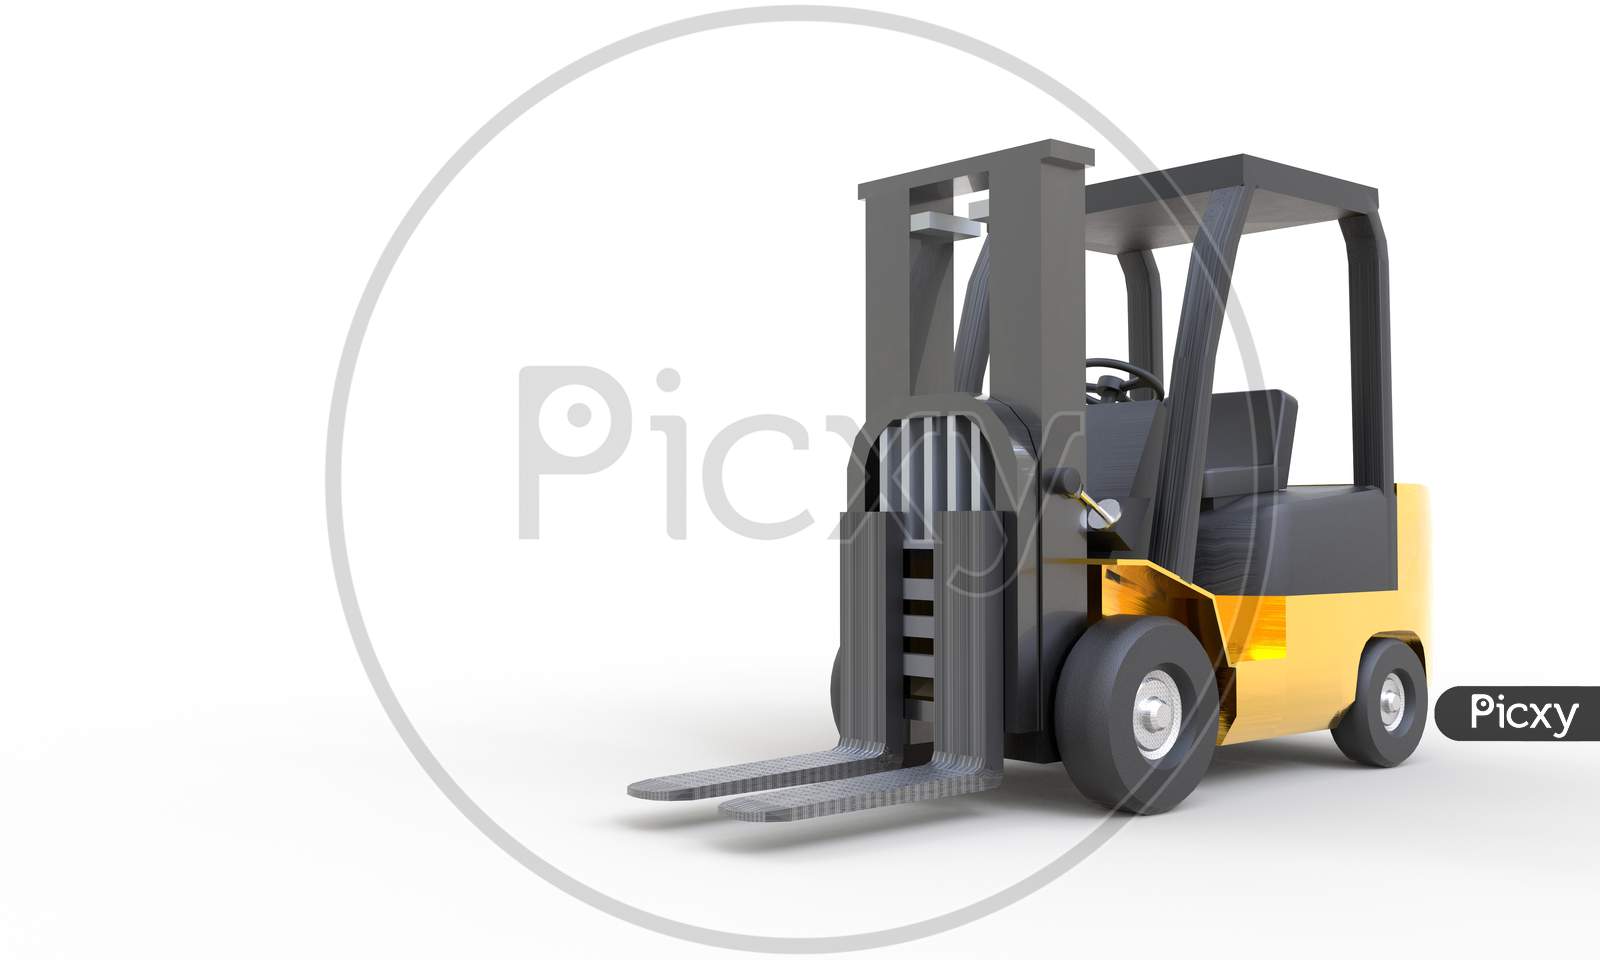 Yellow Forklift With Empty Fork Parking On White Background. Transportation And Industrial Concept. Shipment And Delivery Storage. Copy Space. 3D Illustration Rendering